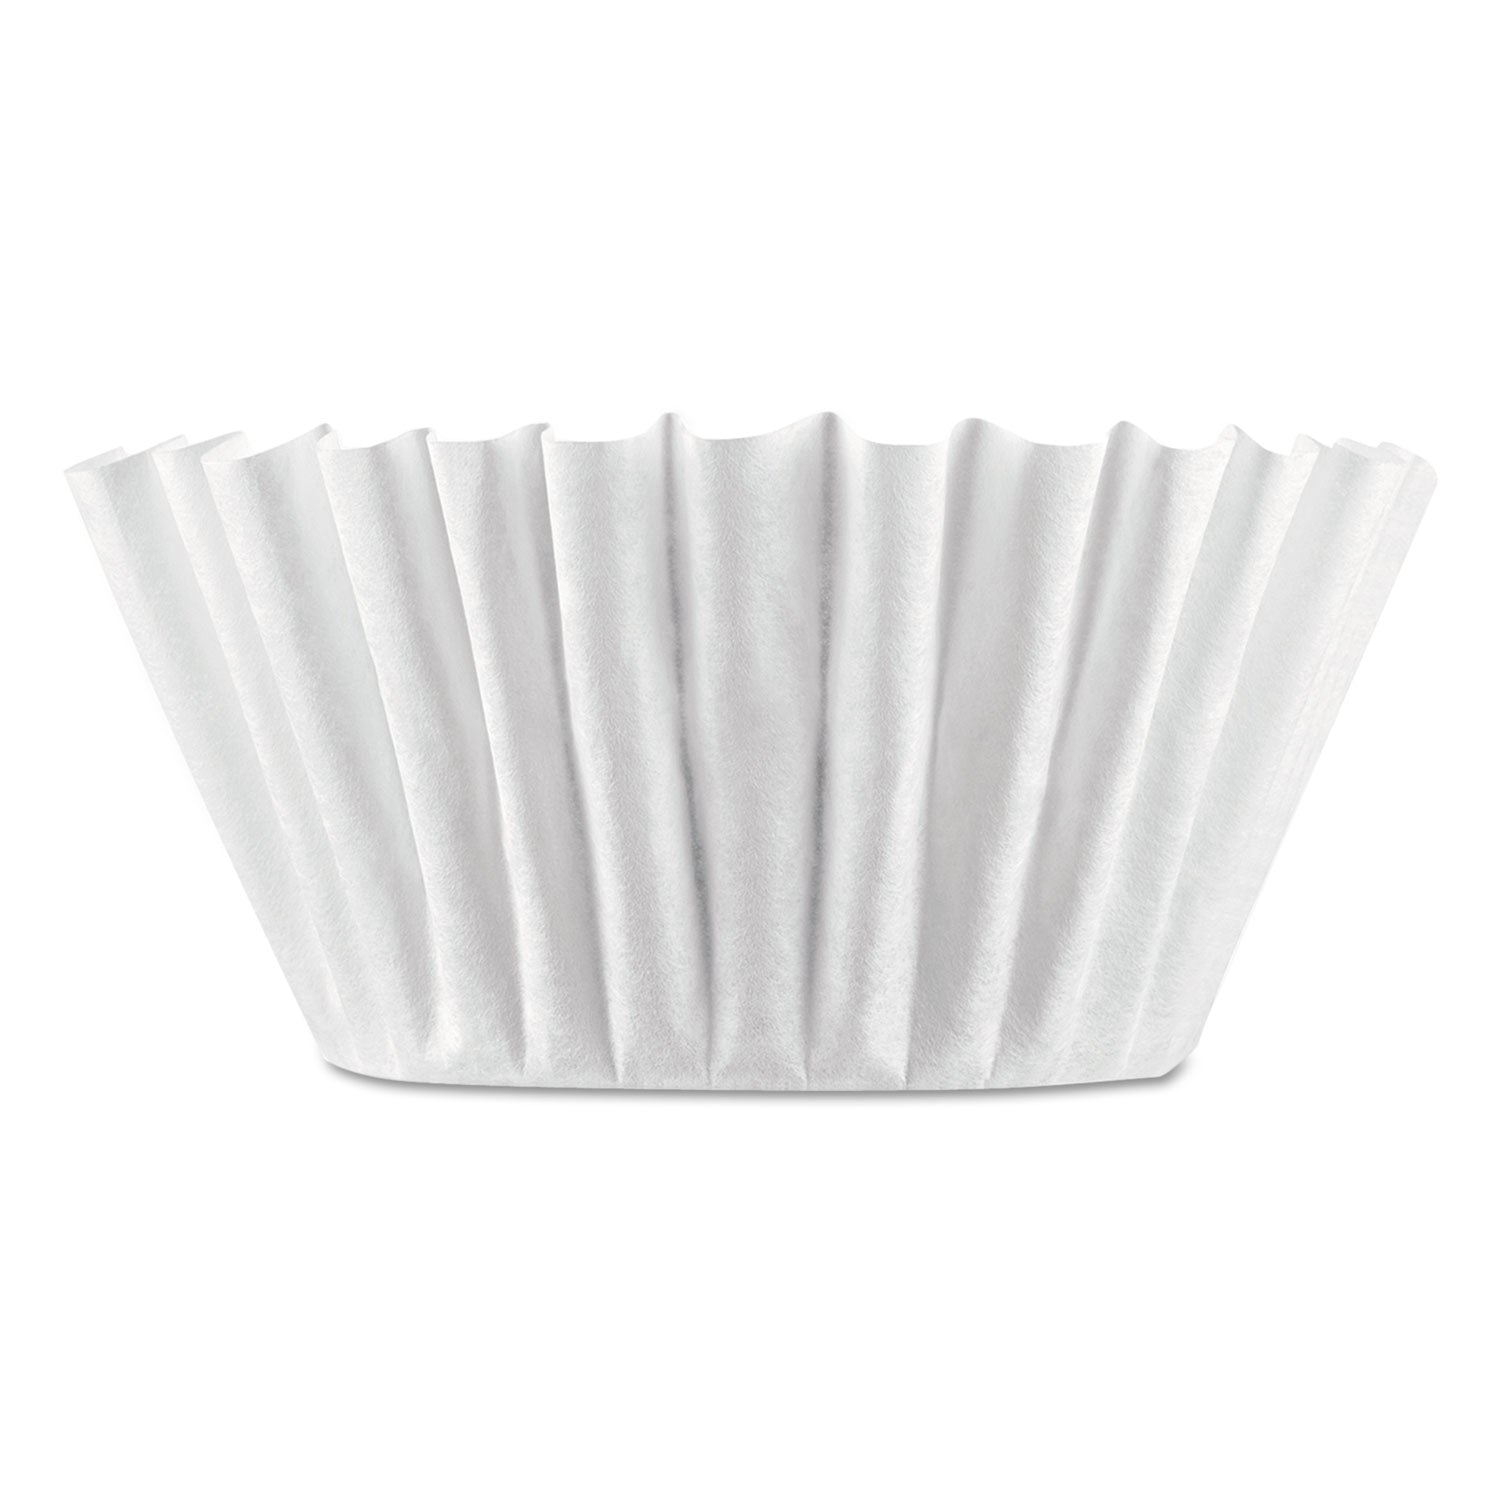 Coffee Filters, 8 to 12 Cup Size, Flat Bottom, 100/Pack - 